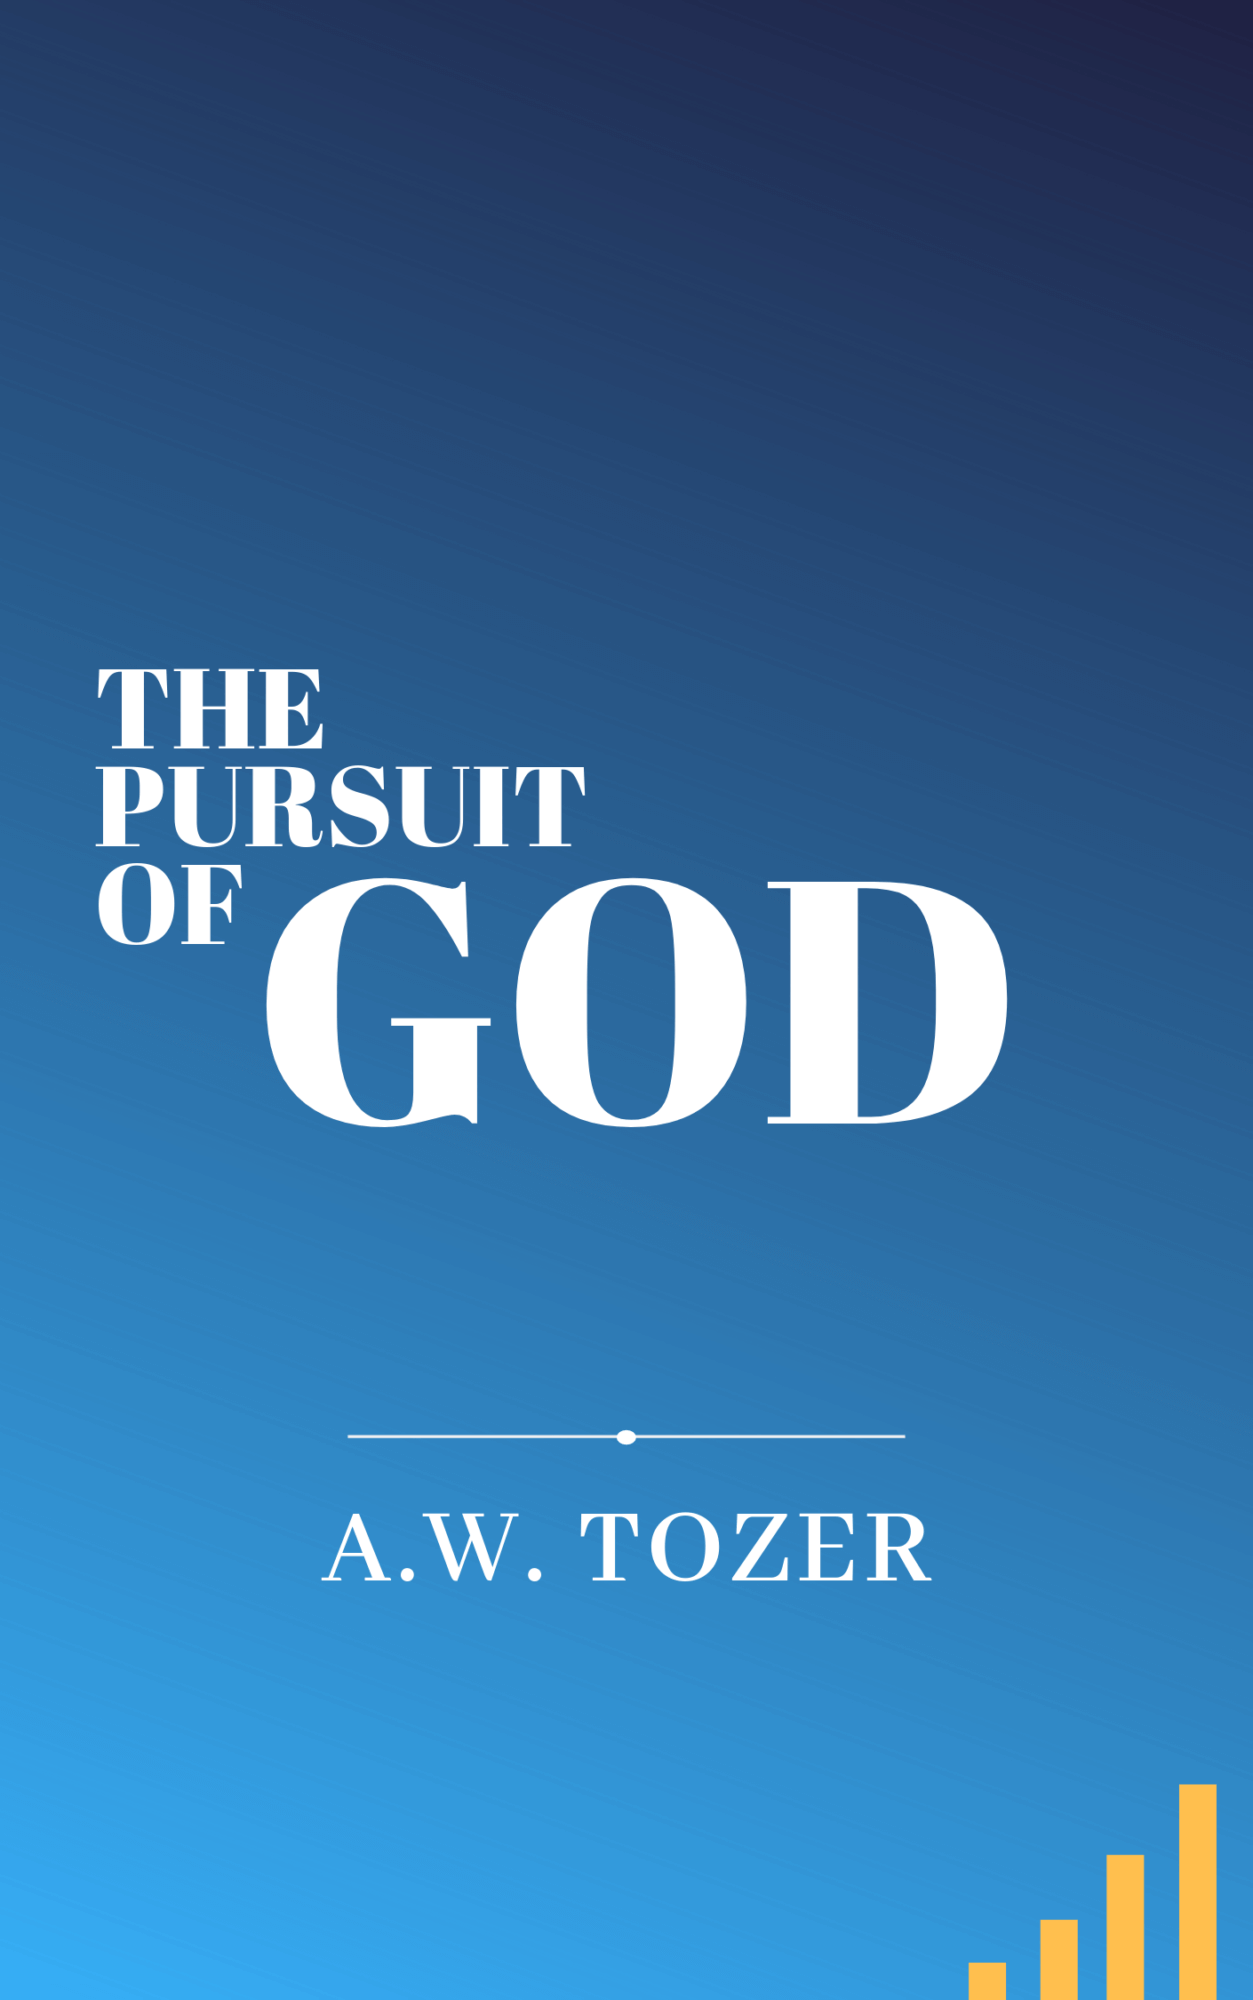 The Pursuit of God by A.W. Tozer